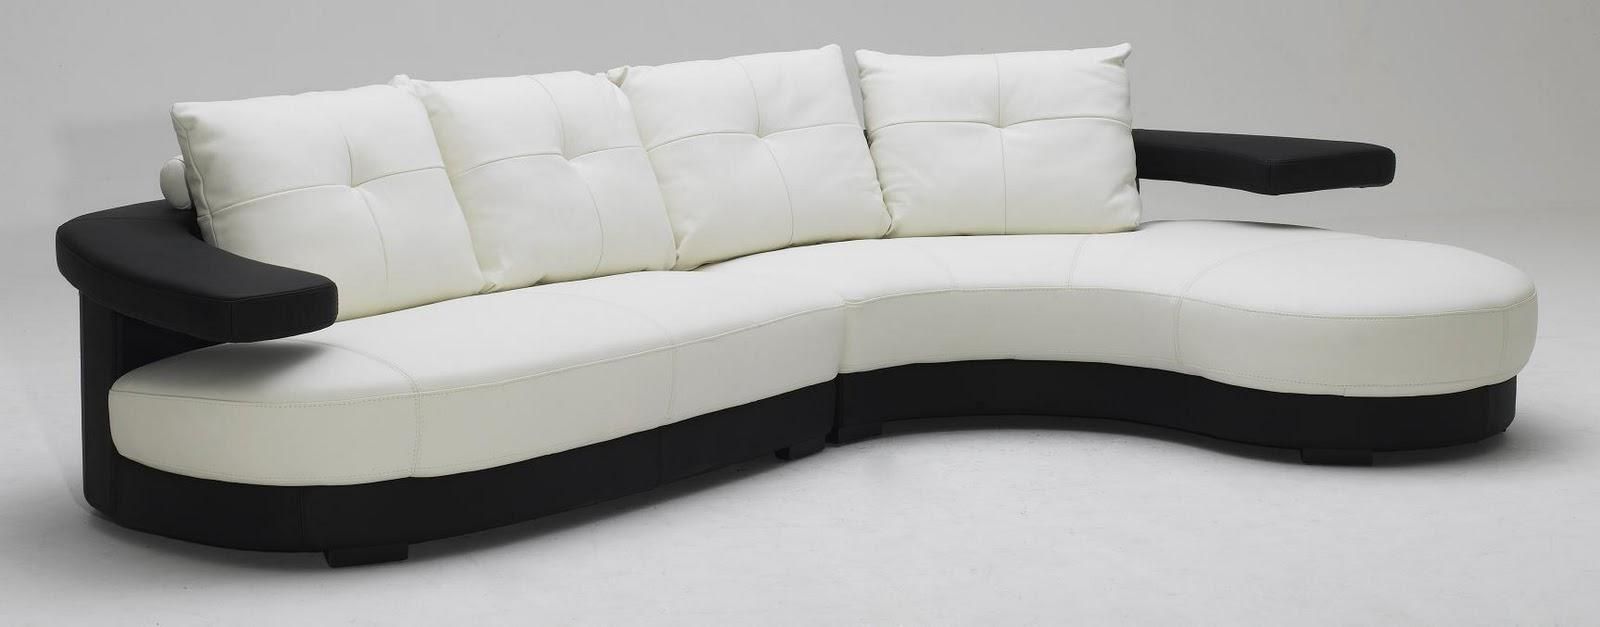 Mesmerizing Modern Sofas And Chairs Spencer Chairgus Modern Throughout Contemporary Sofas And Chairs (View 6 of 20)